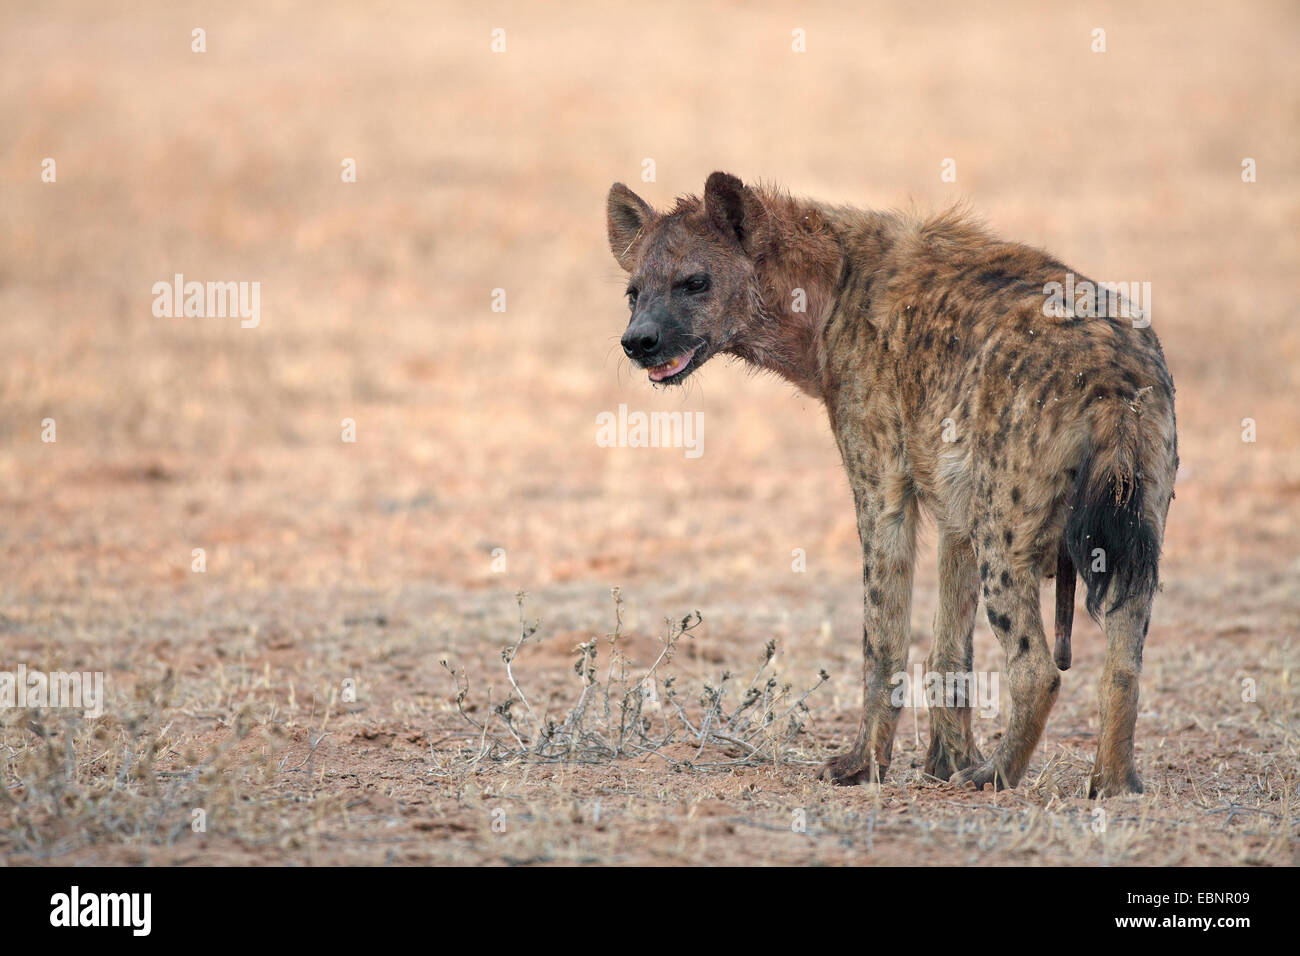 spotted hyena (Crocuta crocuta), male stands in a dune valley, South Africa, Kgalagadi Transfrontier National Park Stock Photo